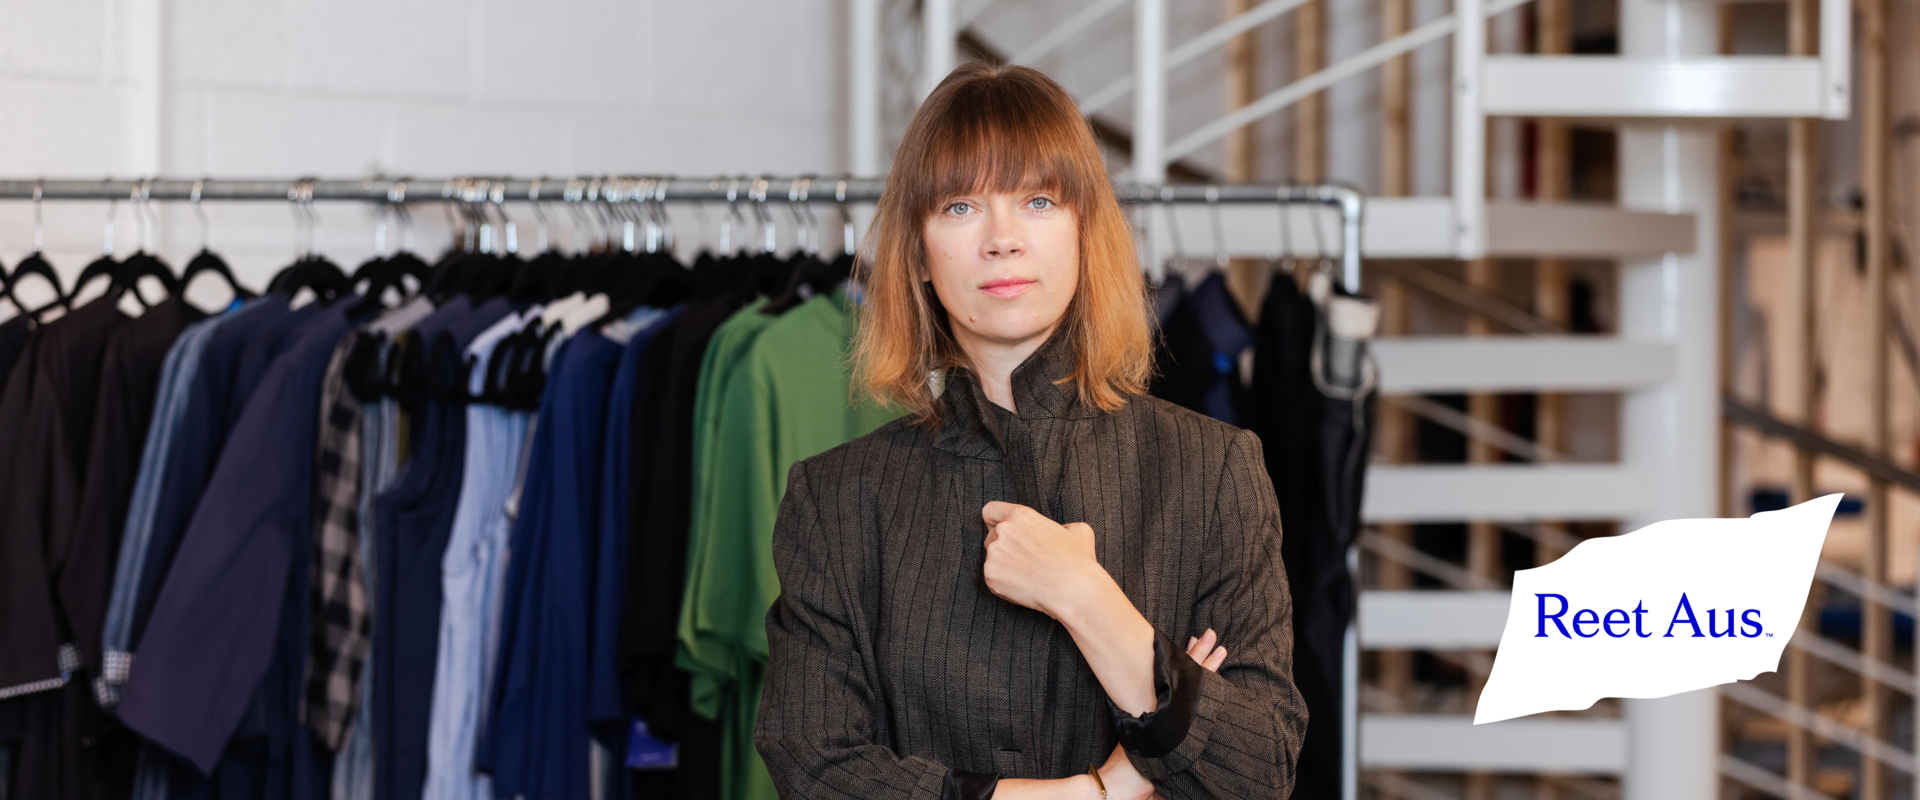 Reet Aus is a sustainable fashion designer and ardent visionary who devised industrial upcycling principles that reduce the fashion industry's impact 